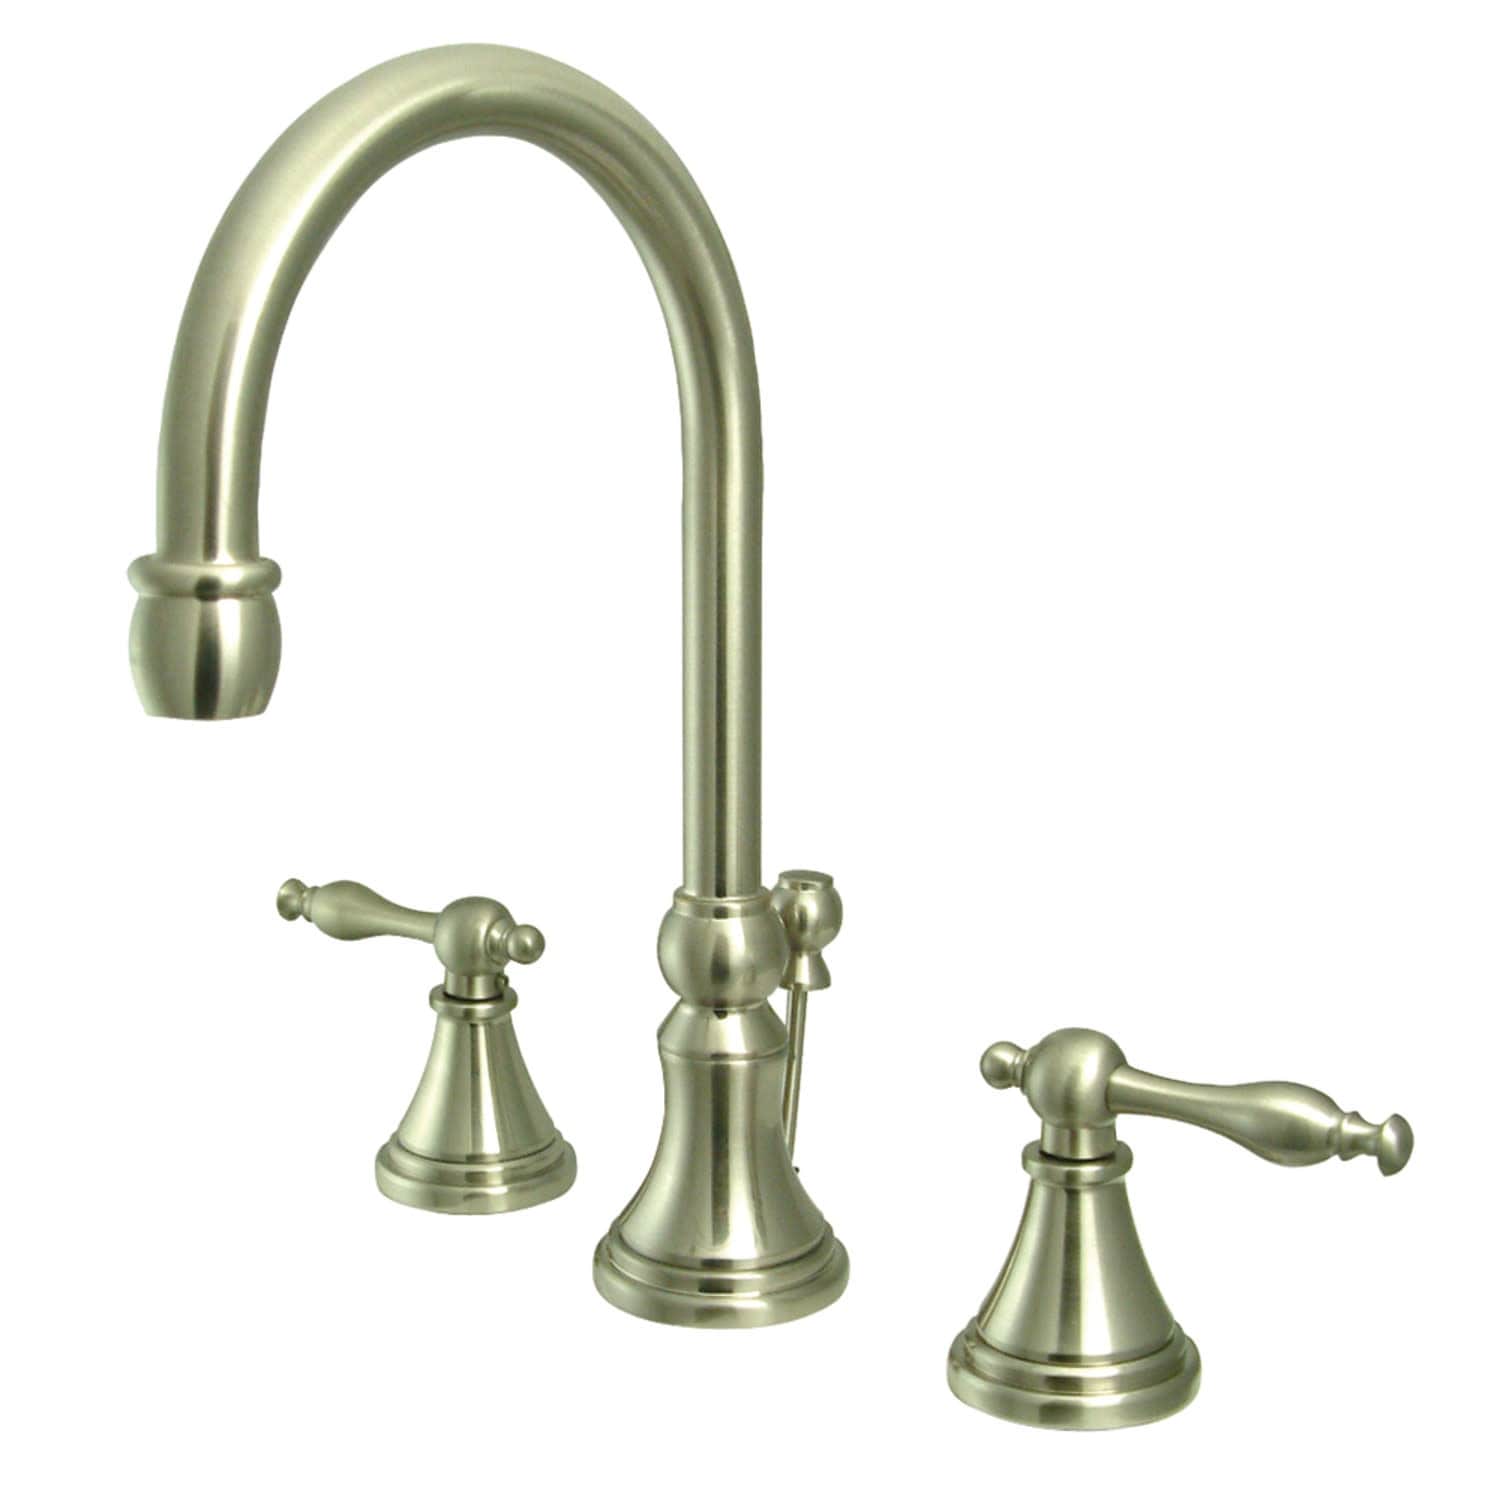 Kingston Brass Governor 1.2 GPM Deck Mounted Bathroom Faucet with